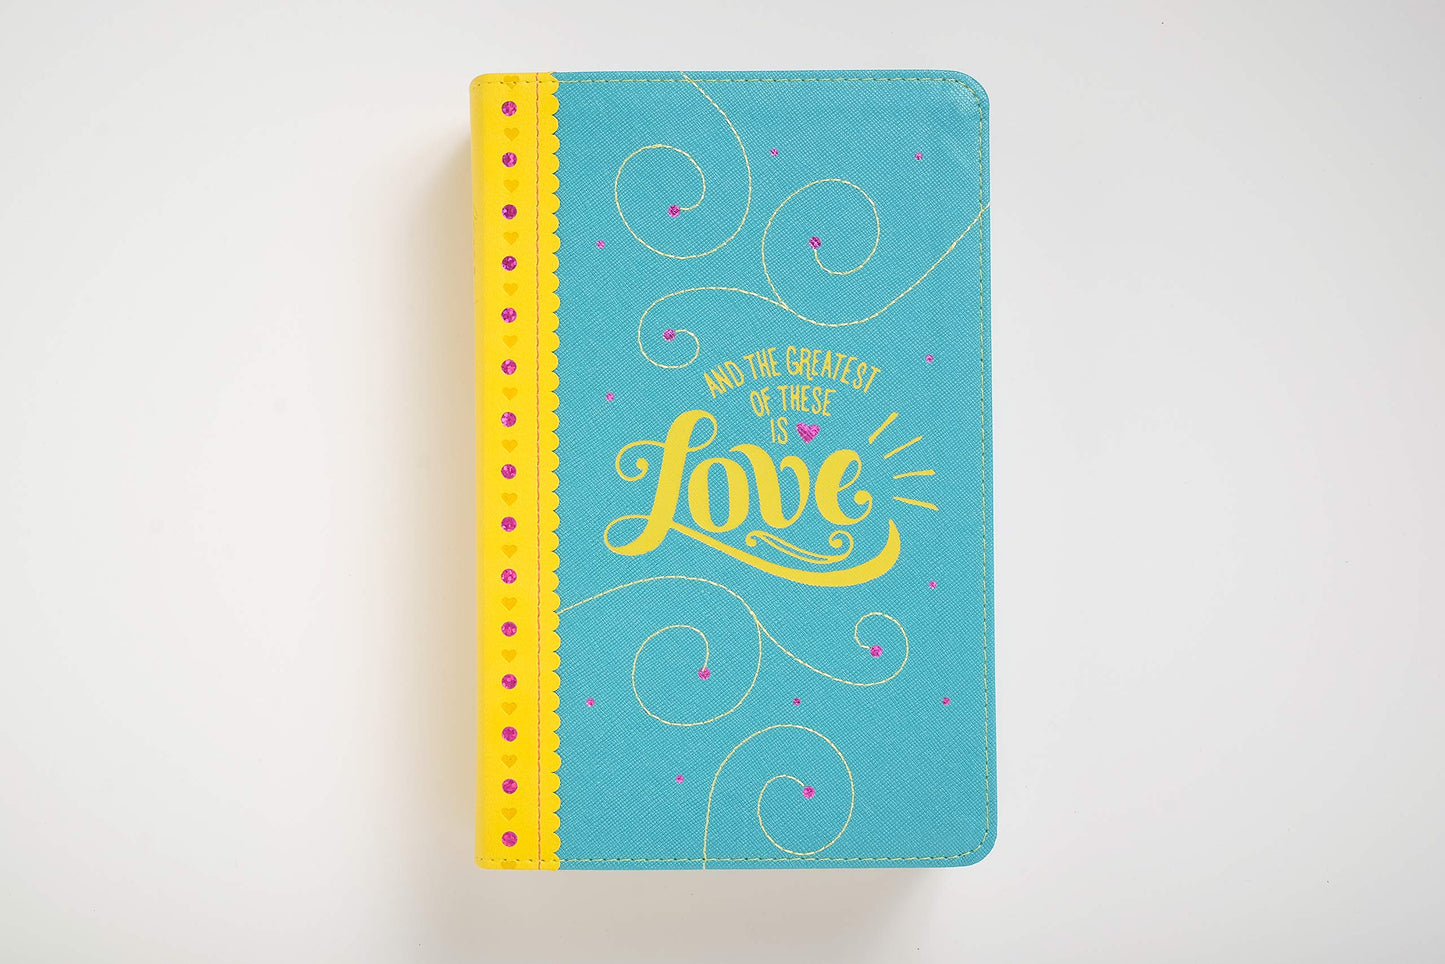 Tyndale NLT Girls Life Application Study Bible, TuTone (LeatherLike, Teal/Yellow), NLT Bible with Over 800 Notes and Features, Foundations for Your Faith Sections